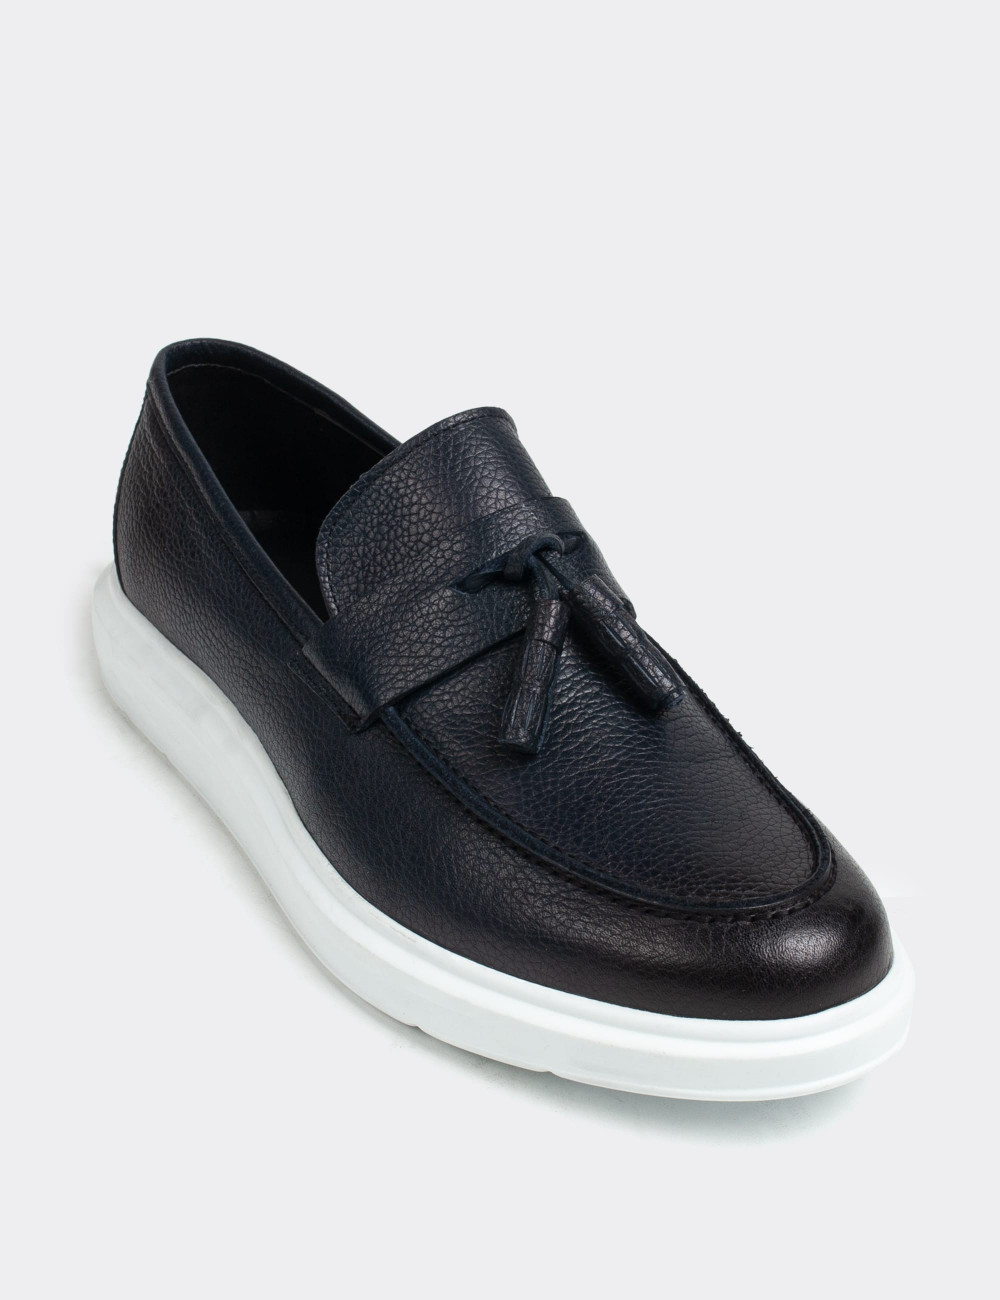 Navy  Leather Loafers & Moccasins Shoes - 01587MLCVP03